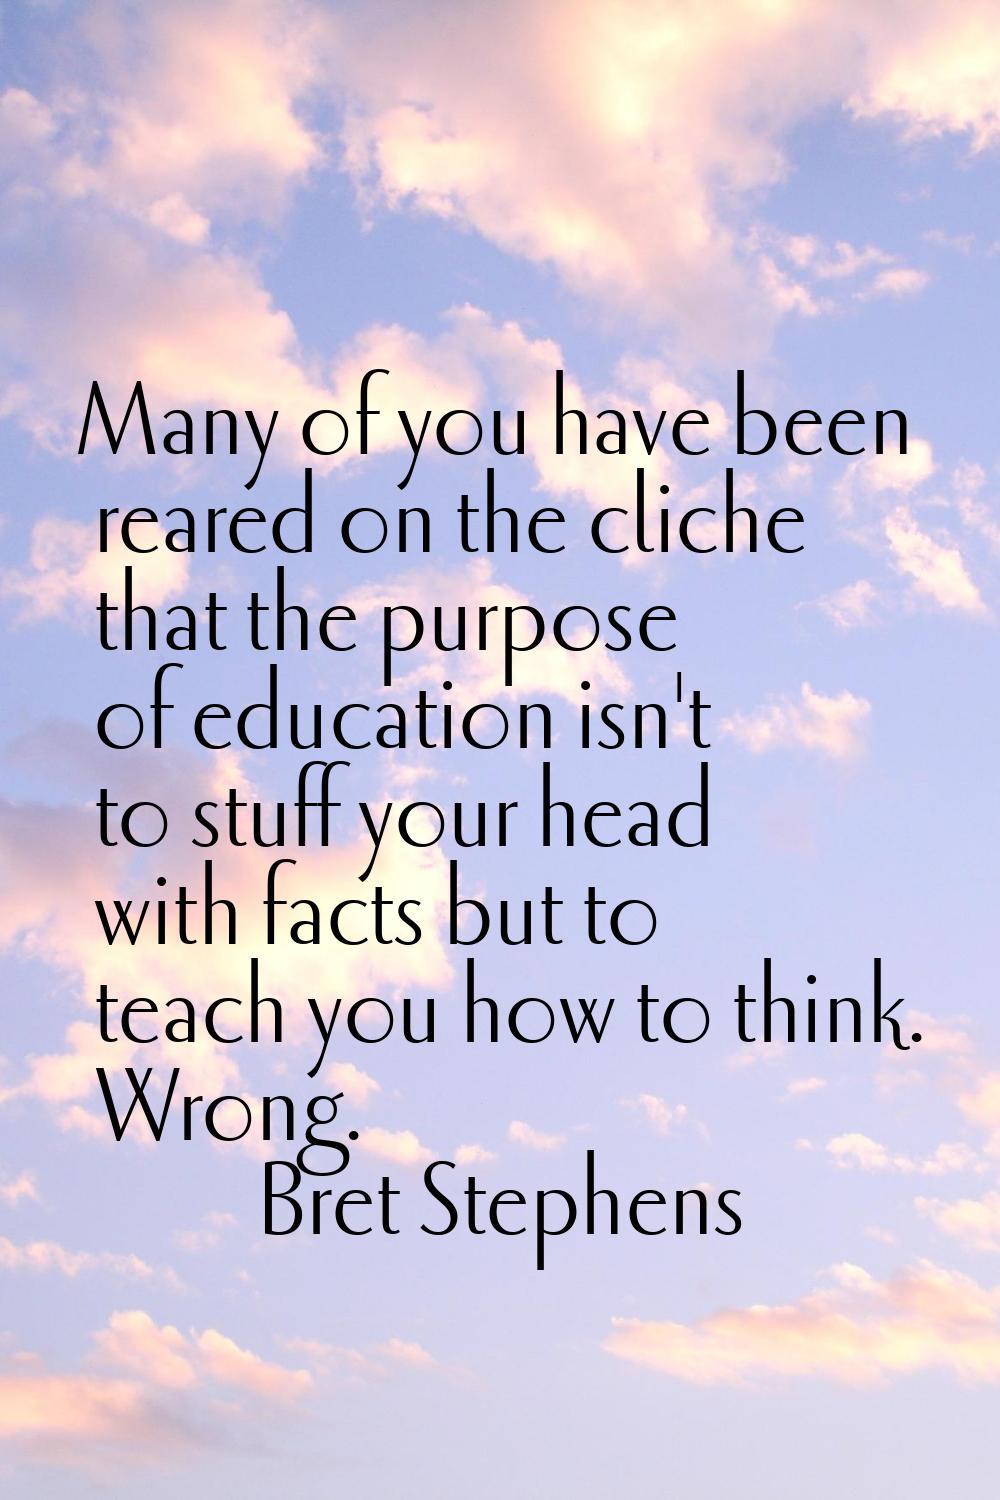 Many of you have been reared on the cliche that the purpose of education isn't to stuff your head w